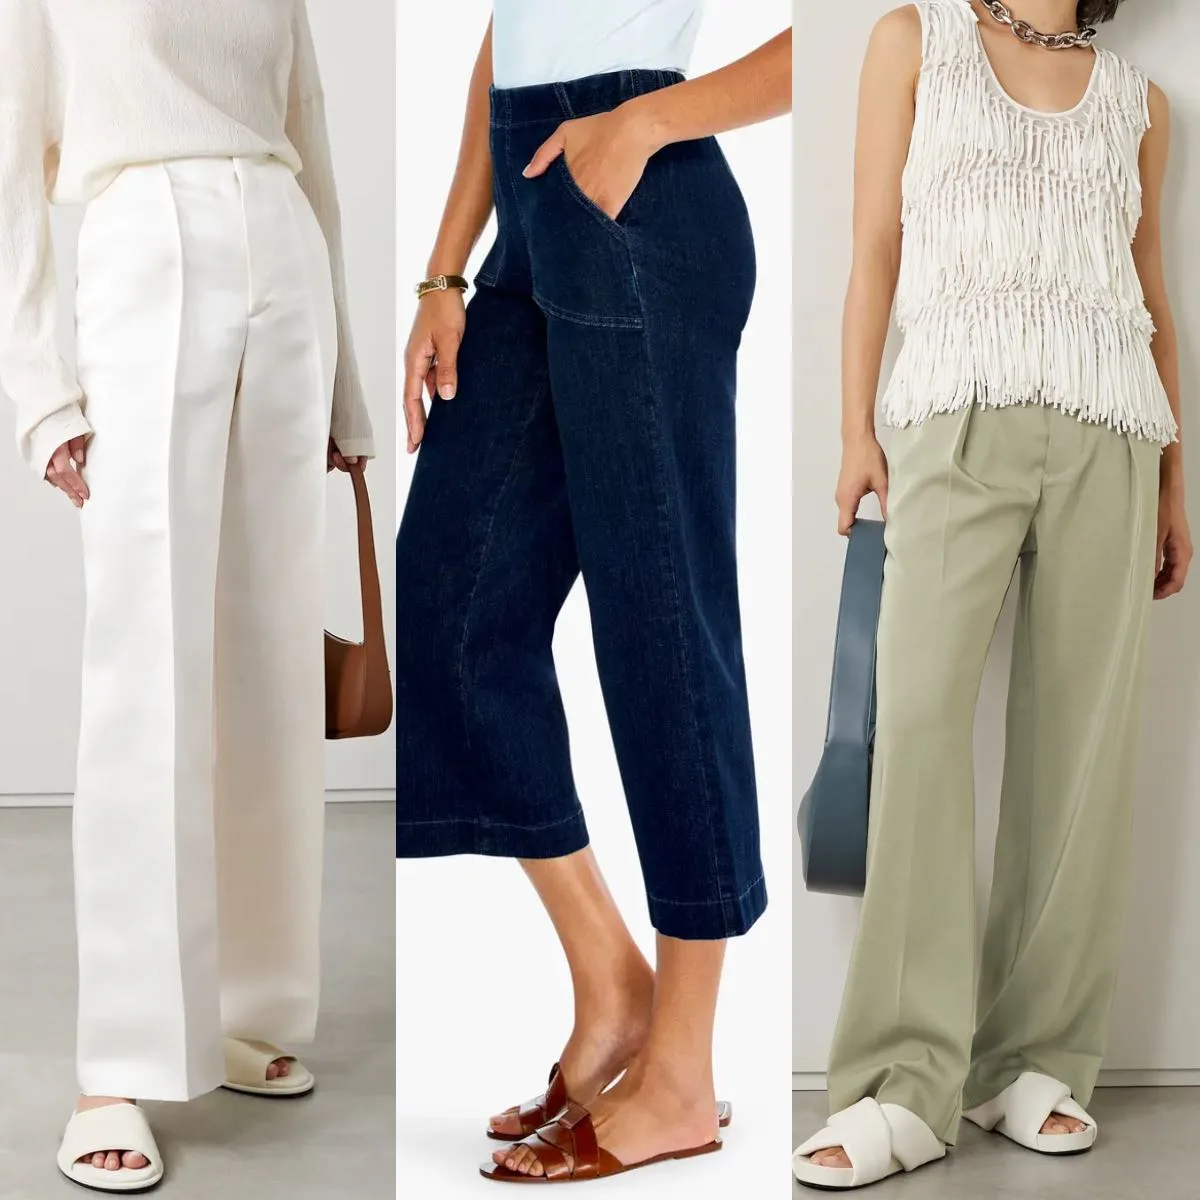 3 women wearing flat slides sandals with wide leg pants and trousers.